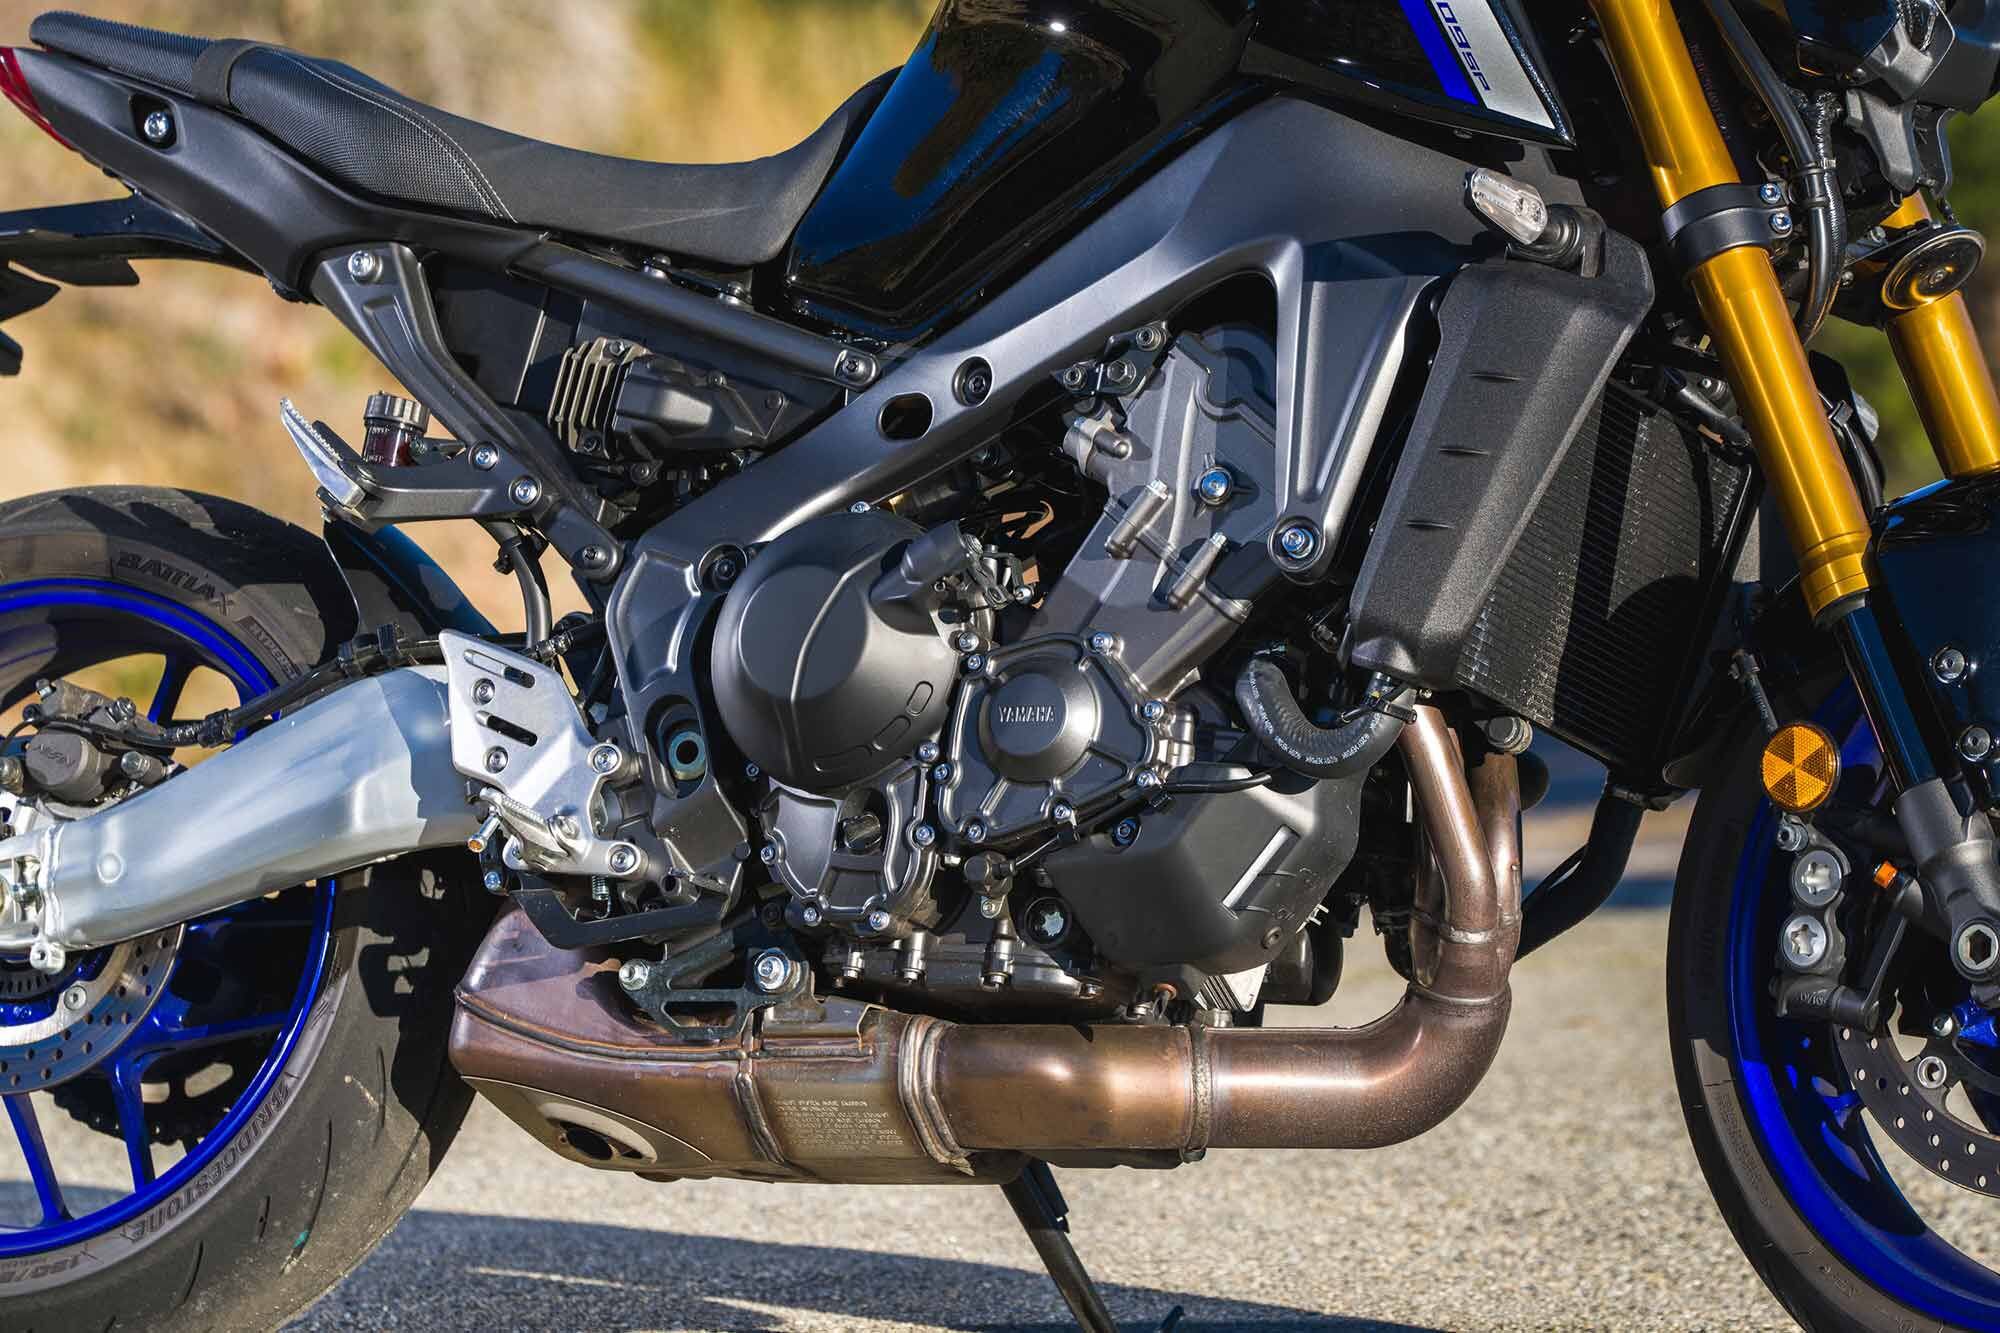 It’s obvious that Yamaha benchmarked Triumph’s inline-three when engineering its 890cc triple. The Tuning Fork brand’s powertrain is superior in every way.